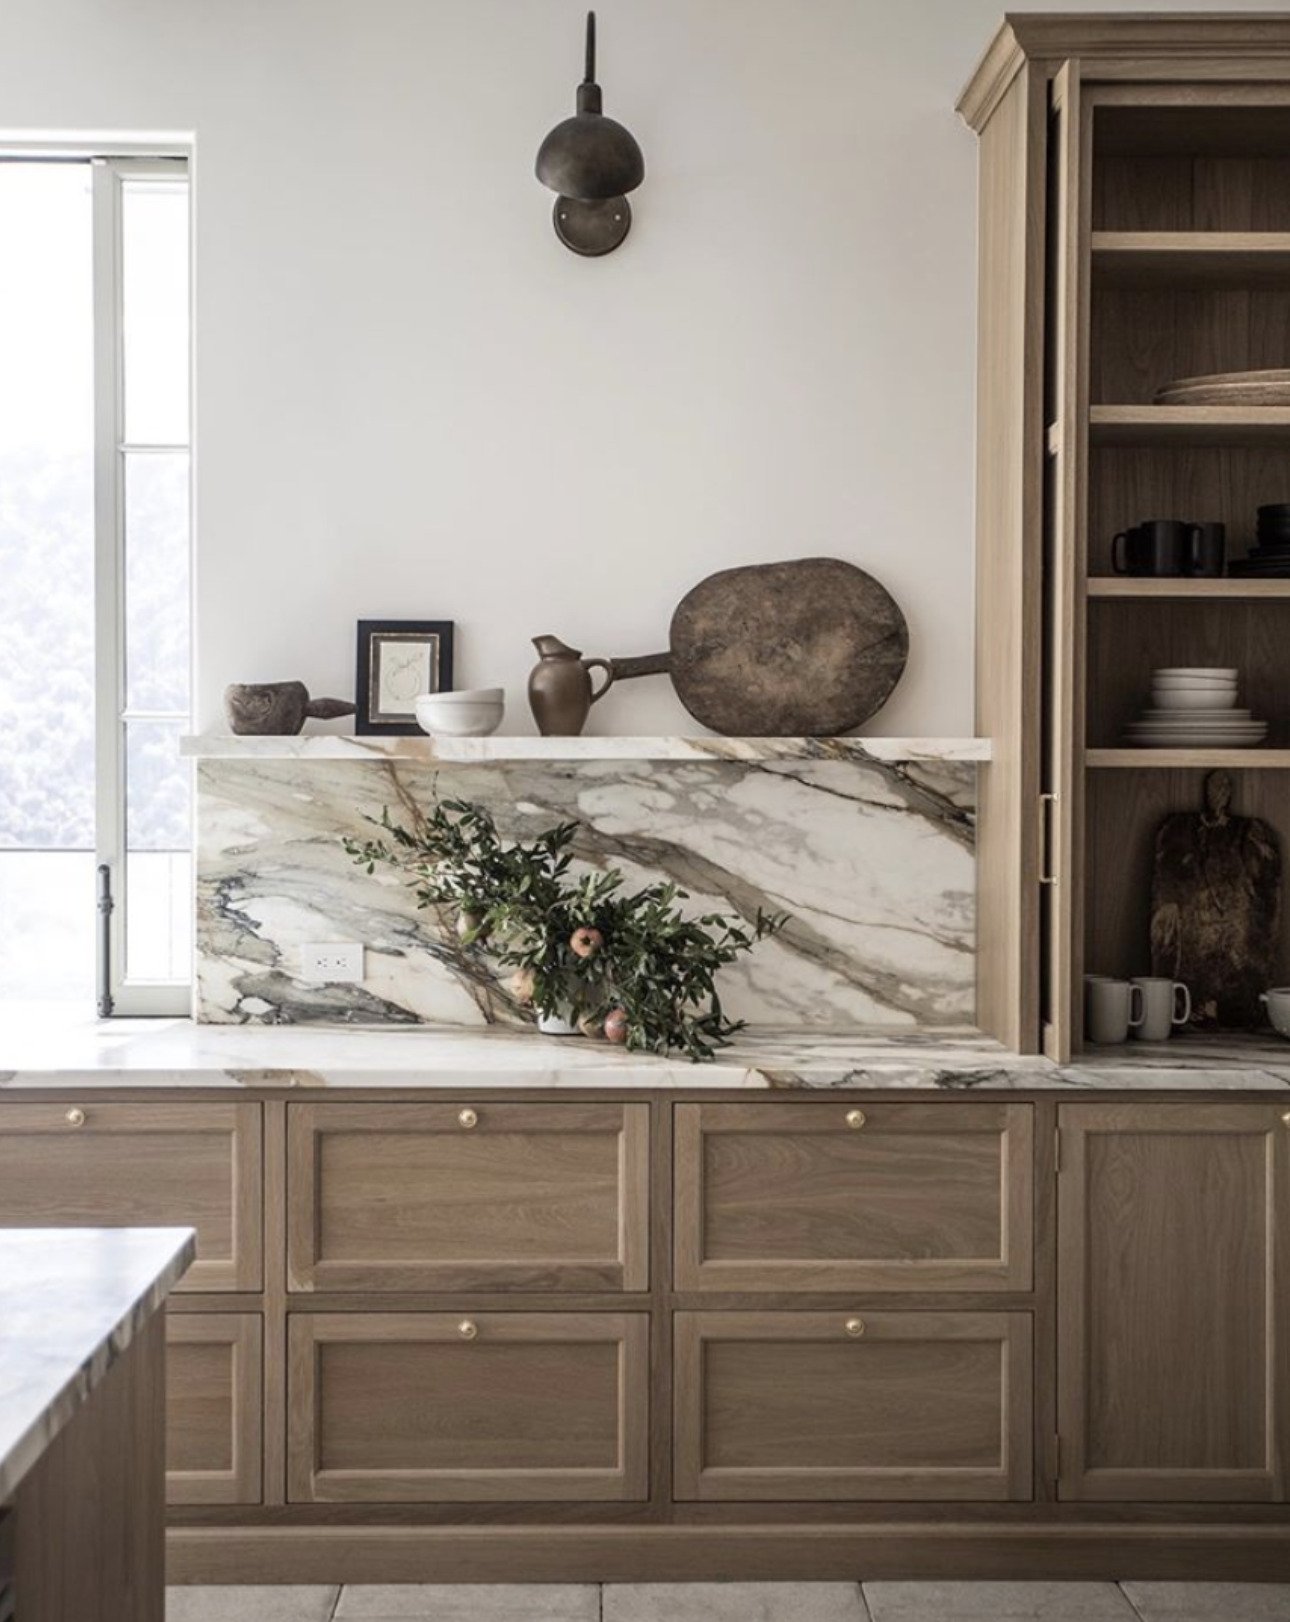 medium wood kitchen cabinets and marble counter with ledge holding rustic cutting board